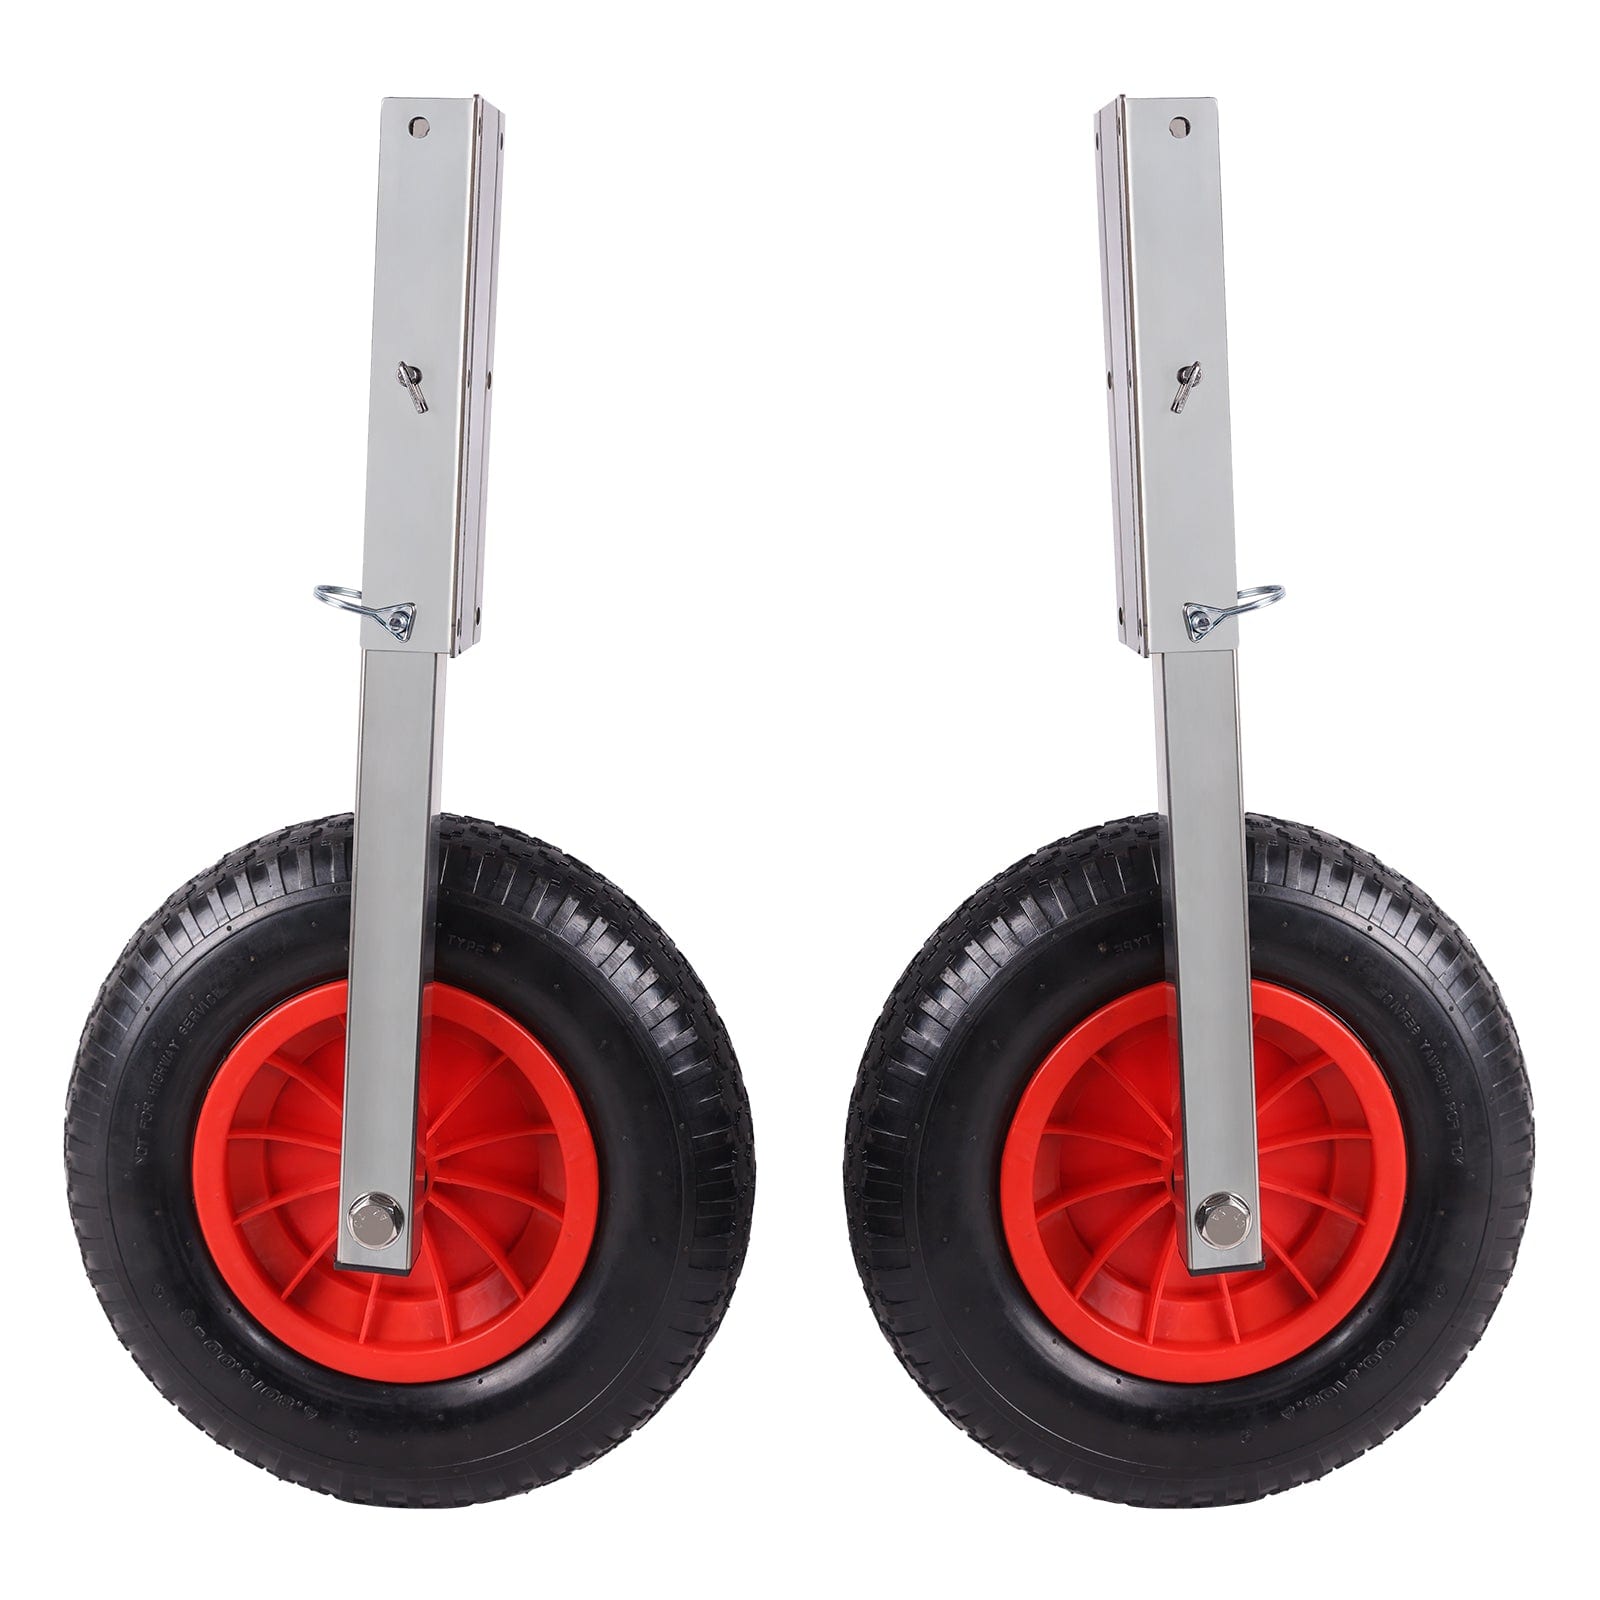 600LBS 15 Inch Boat Launching Wheels Set, Easy Smooth Launch